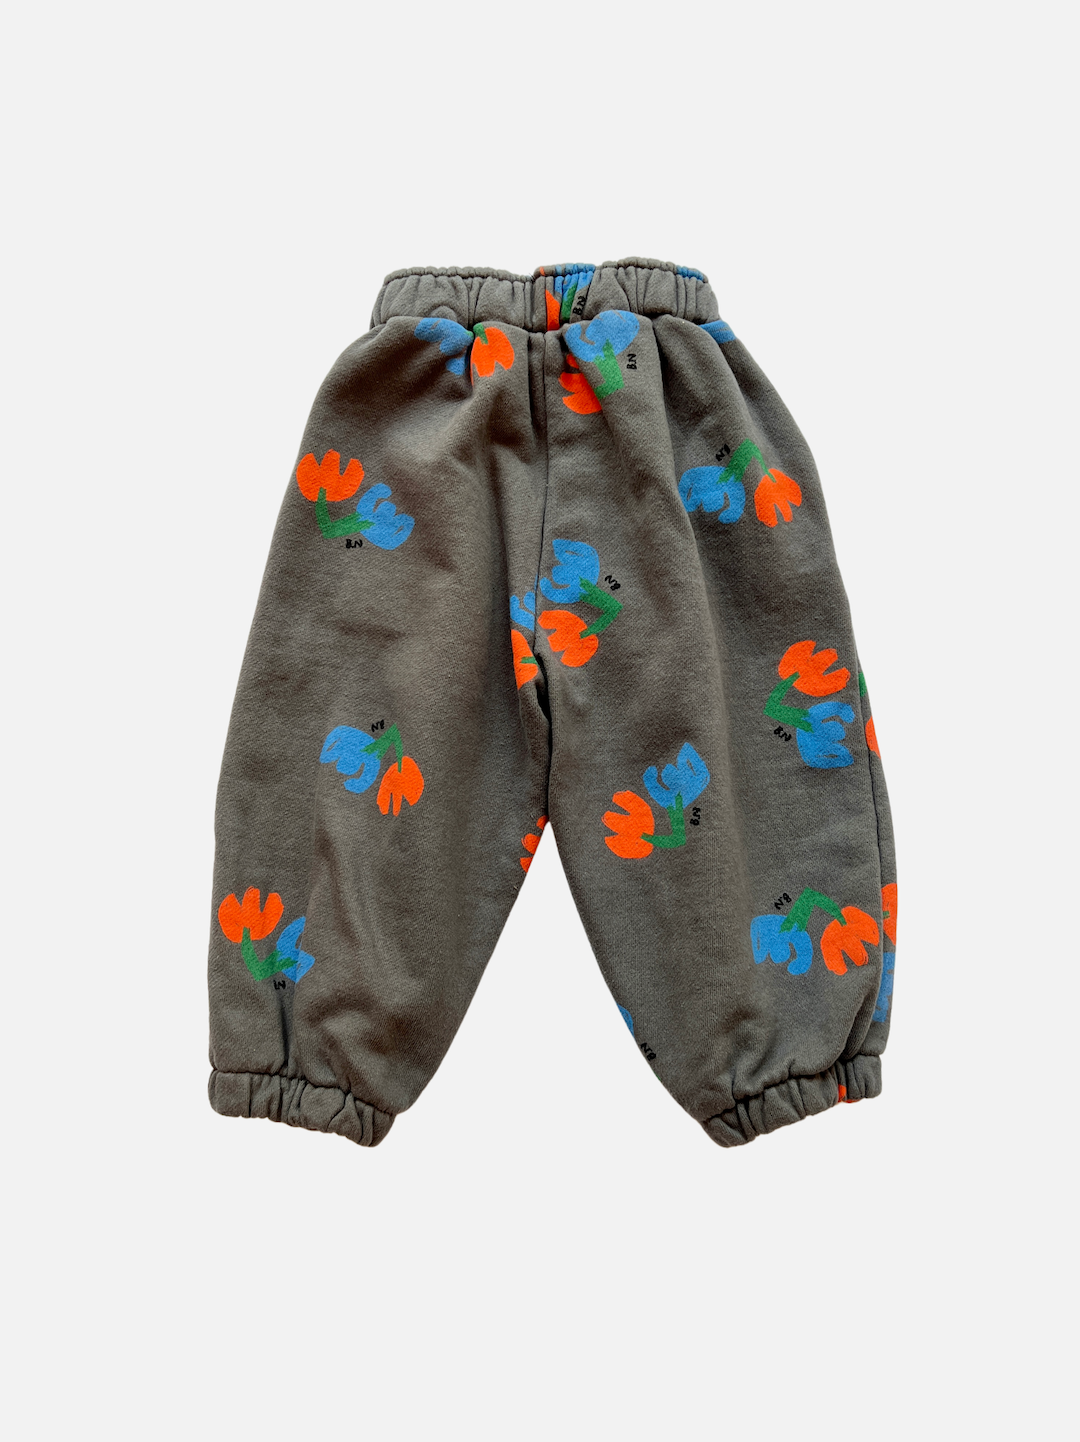 Pair of kids' sweatpants in slate gray printed with blue and orange flowers, back view